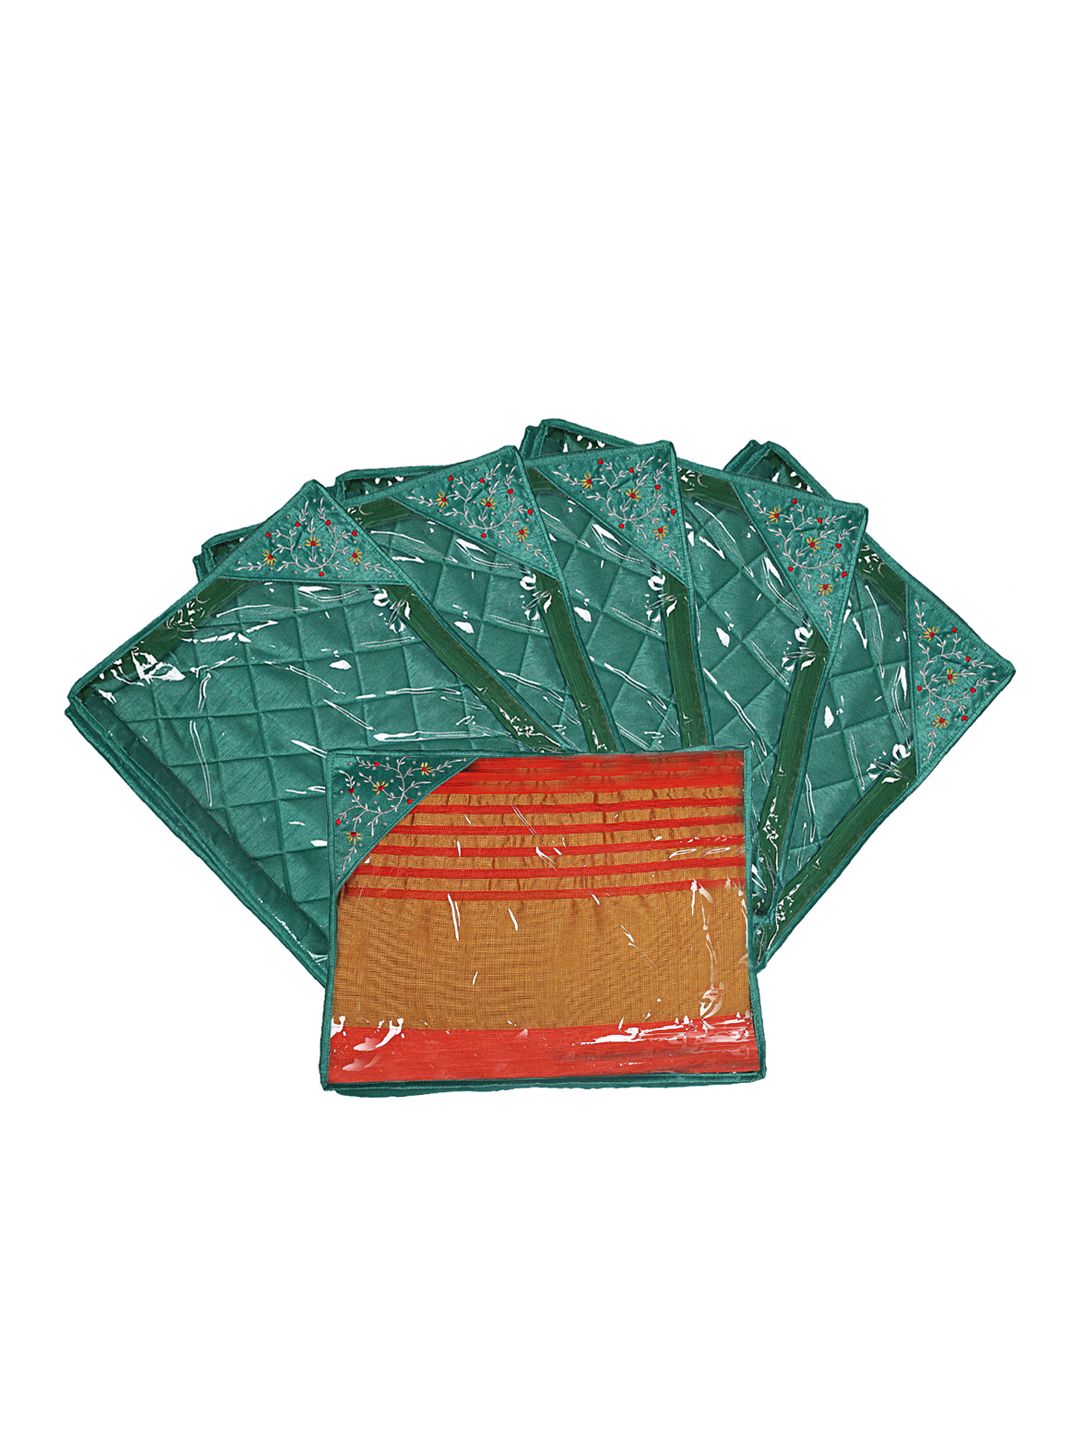 Kuber Industries Set Of 6 Green Solid Single Packing Saree Cover Organizer Price in India